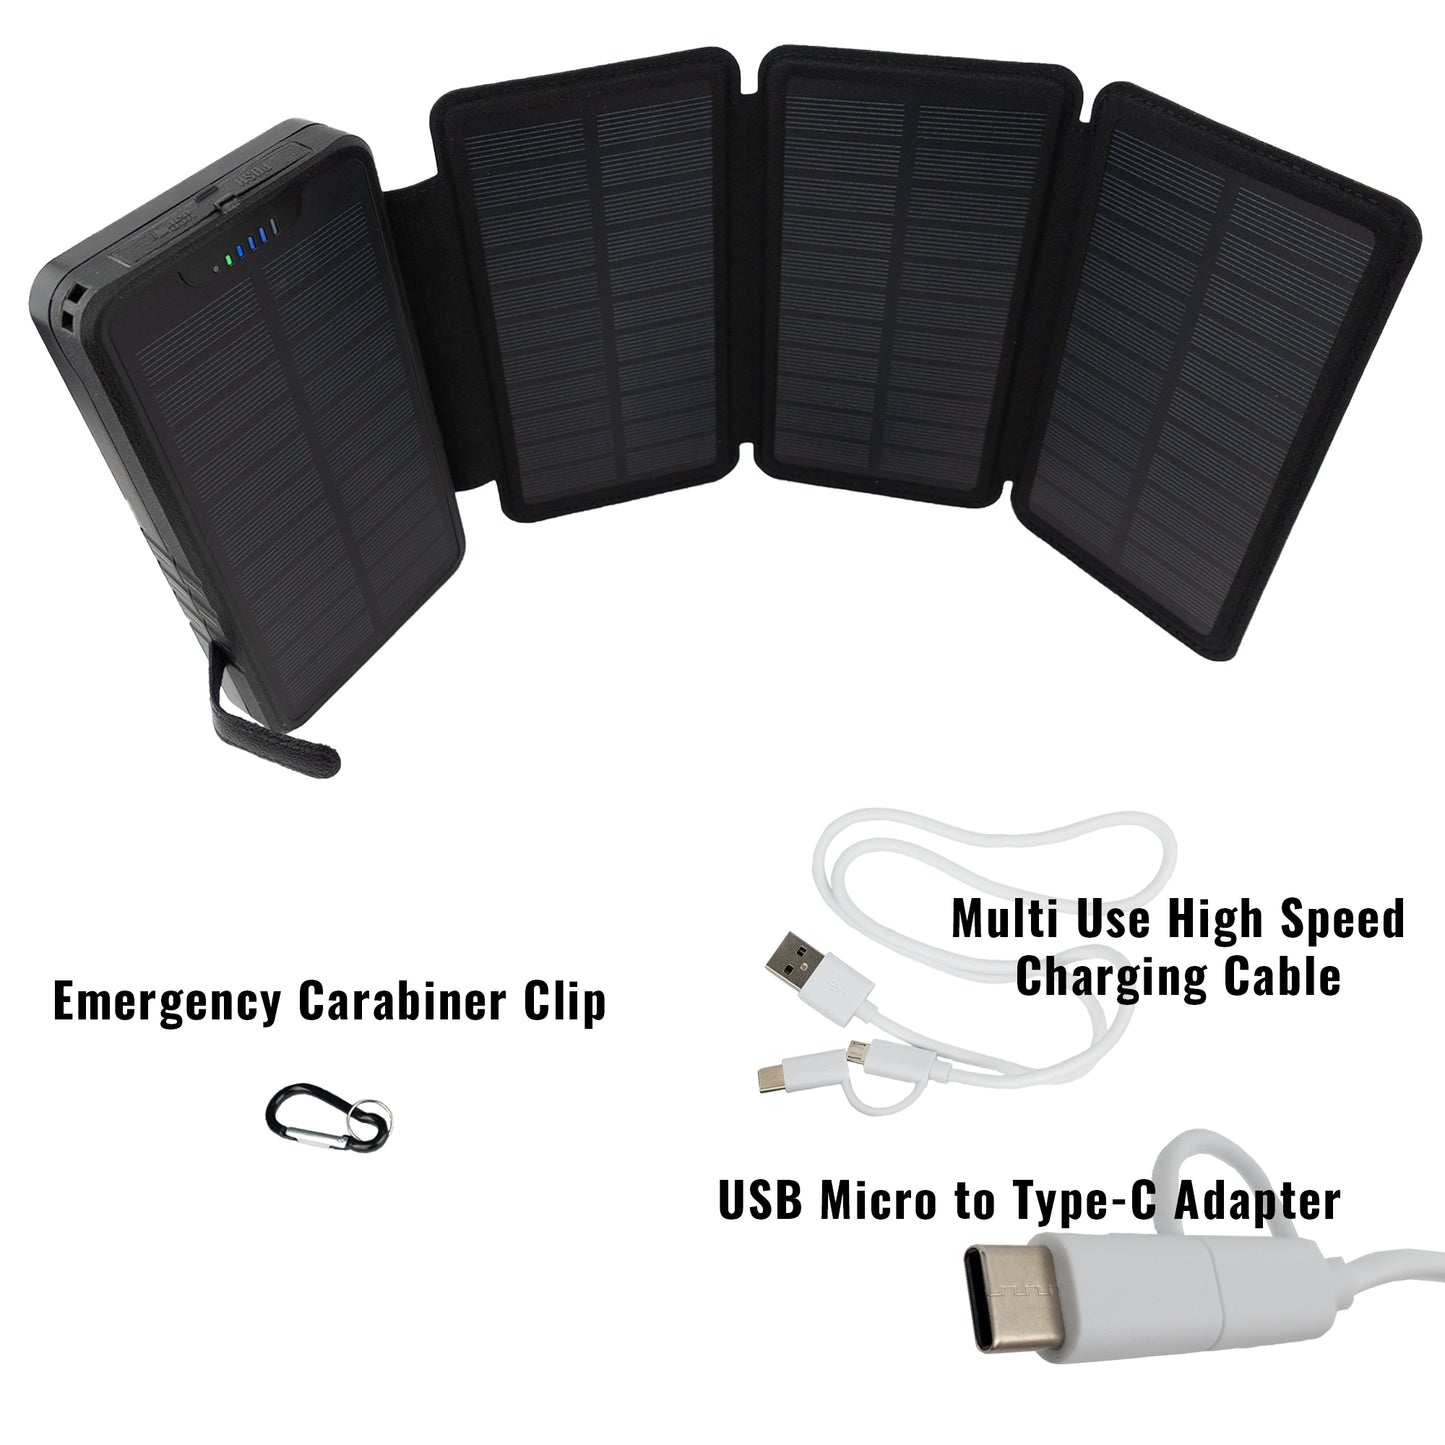 [ Pack of 2 ] Tough Light 820S 4 Panel USB Solar Power Bank Charger - 20,000mAh Li Polymer with USB Phone Charging - 2AMP High Speed Cable Included